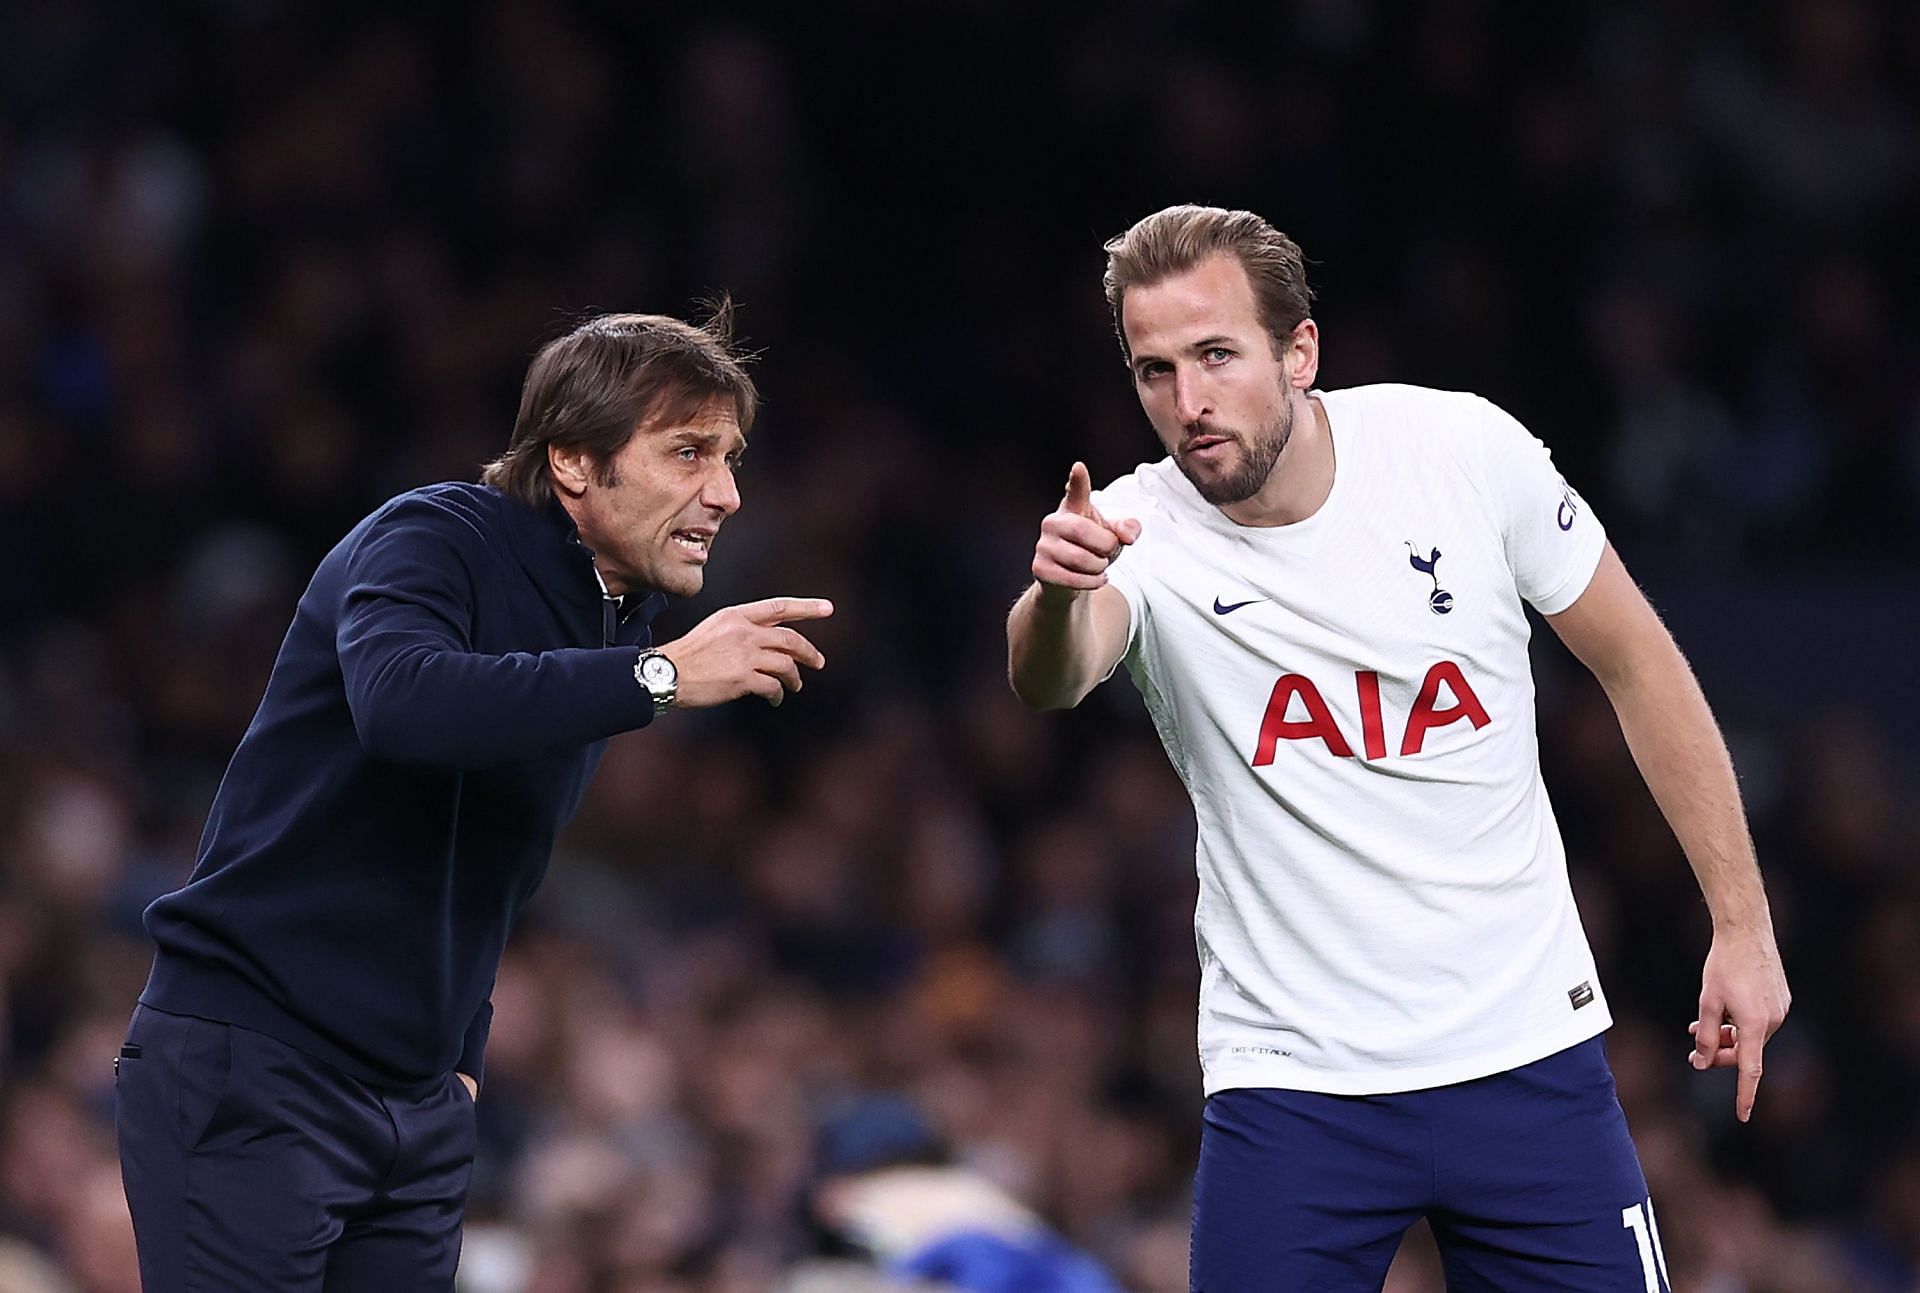 Antonio Conte and Harry Kane face an uphill task to qualify for the 2022-23 UEFA Champions League